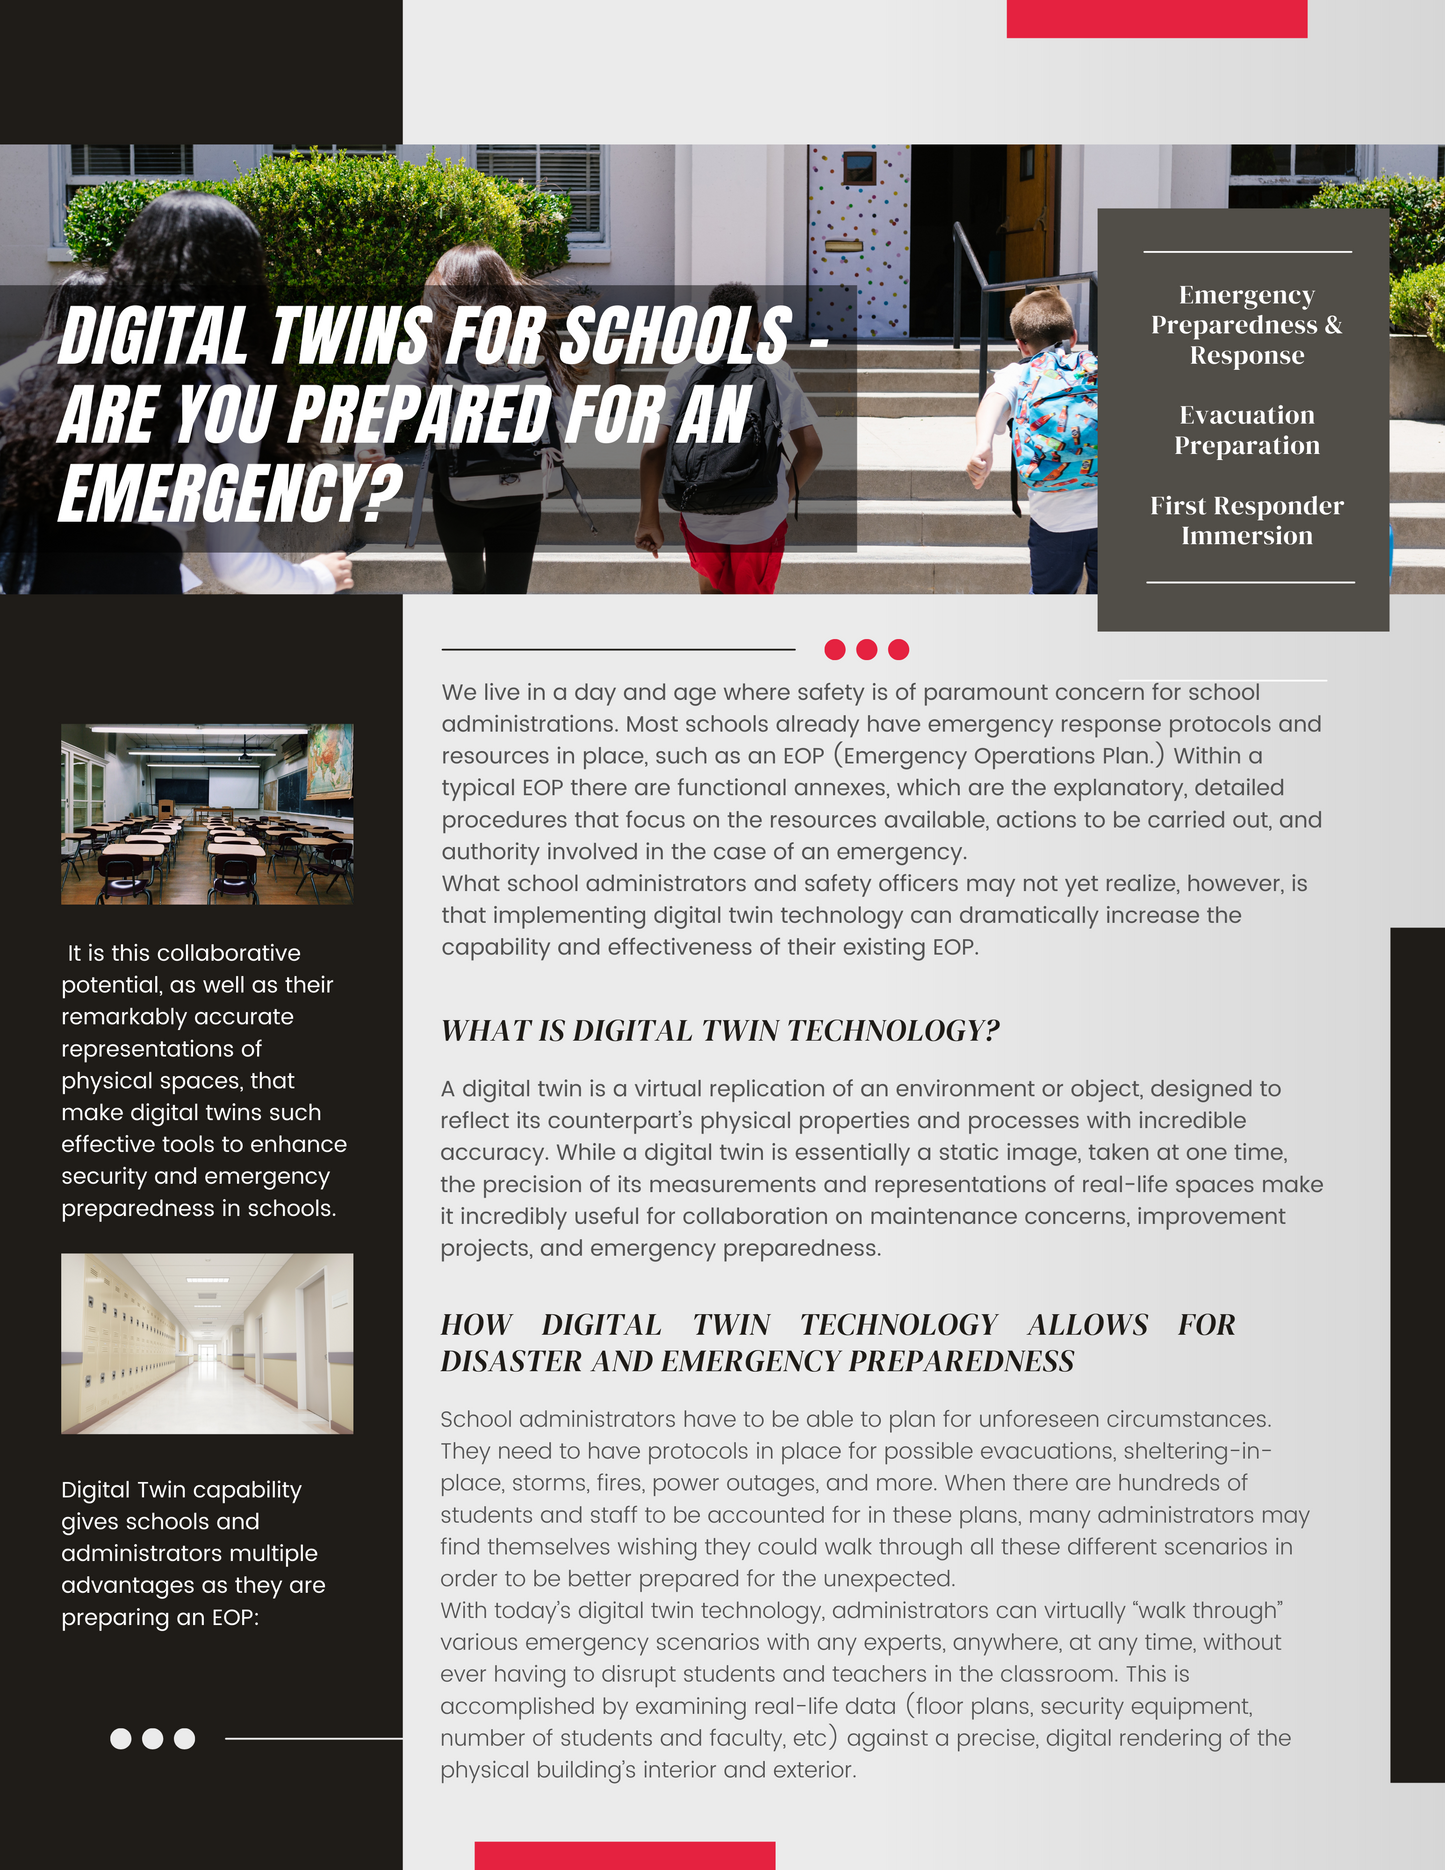 Digital Twins for School Safety and Security Preparations